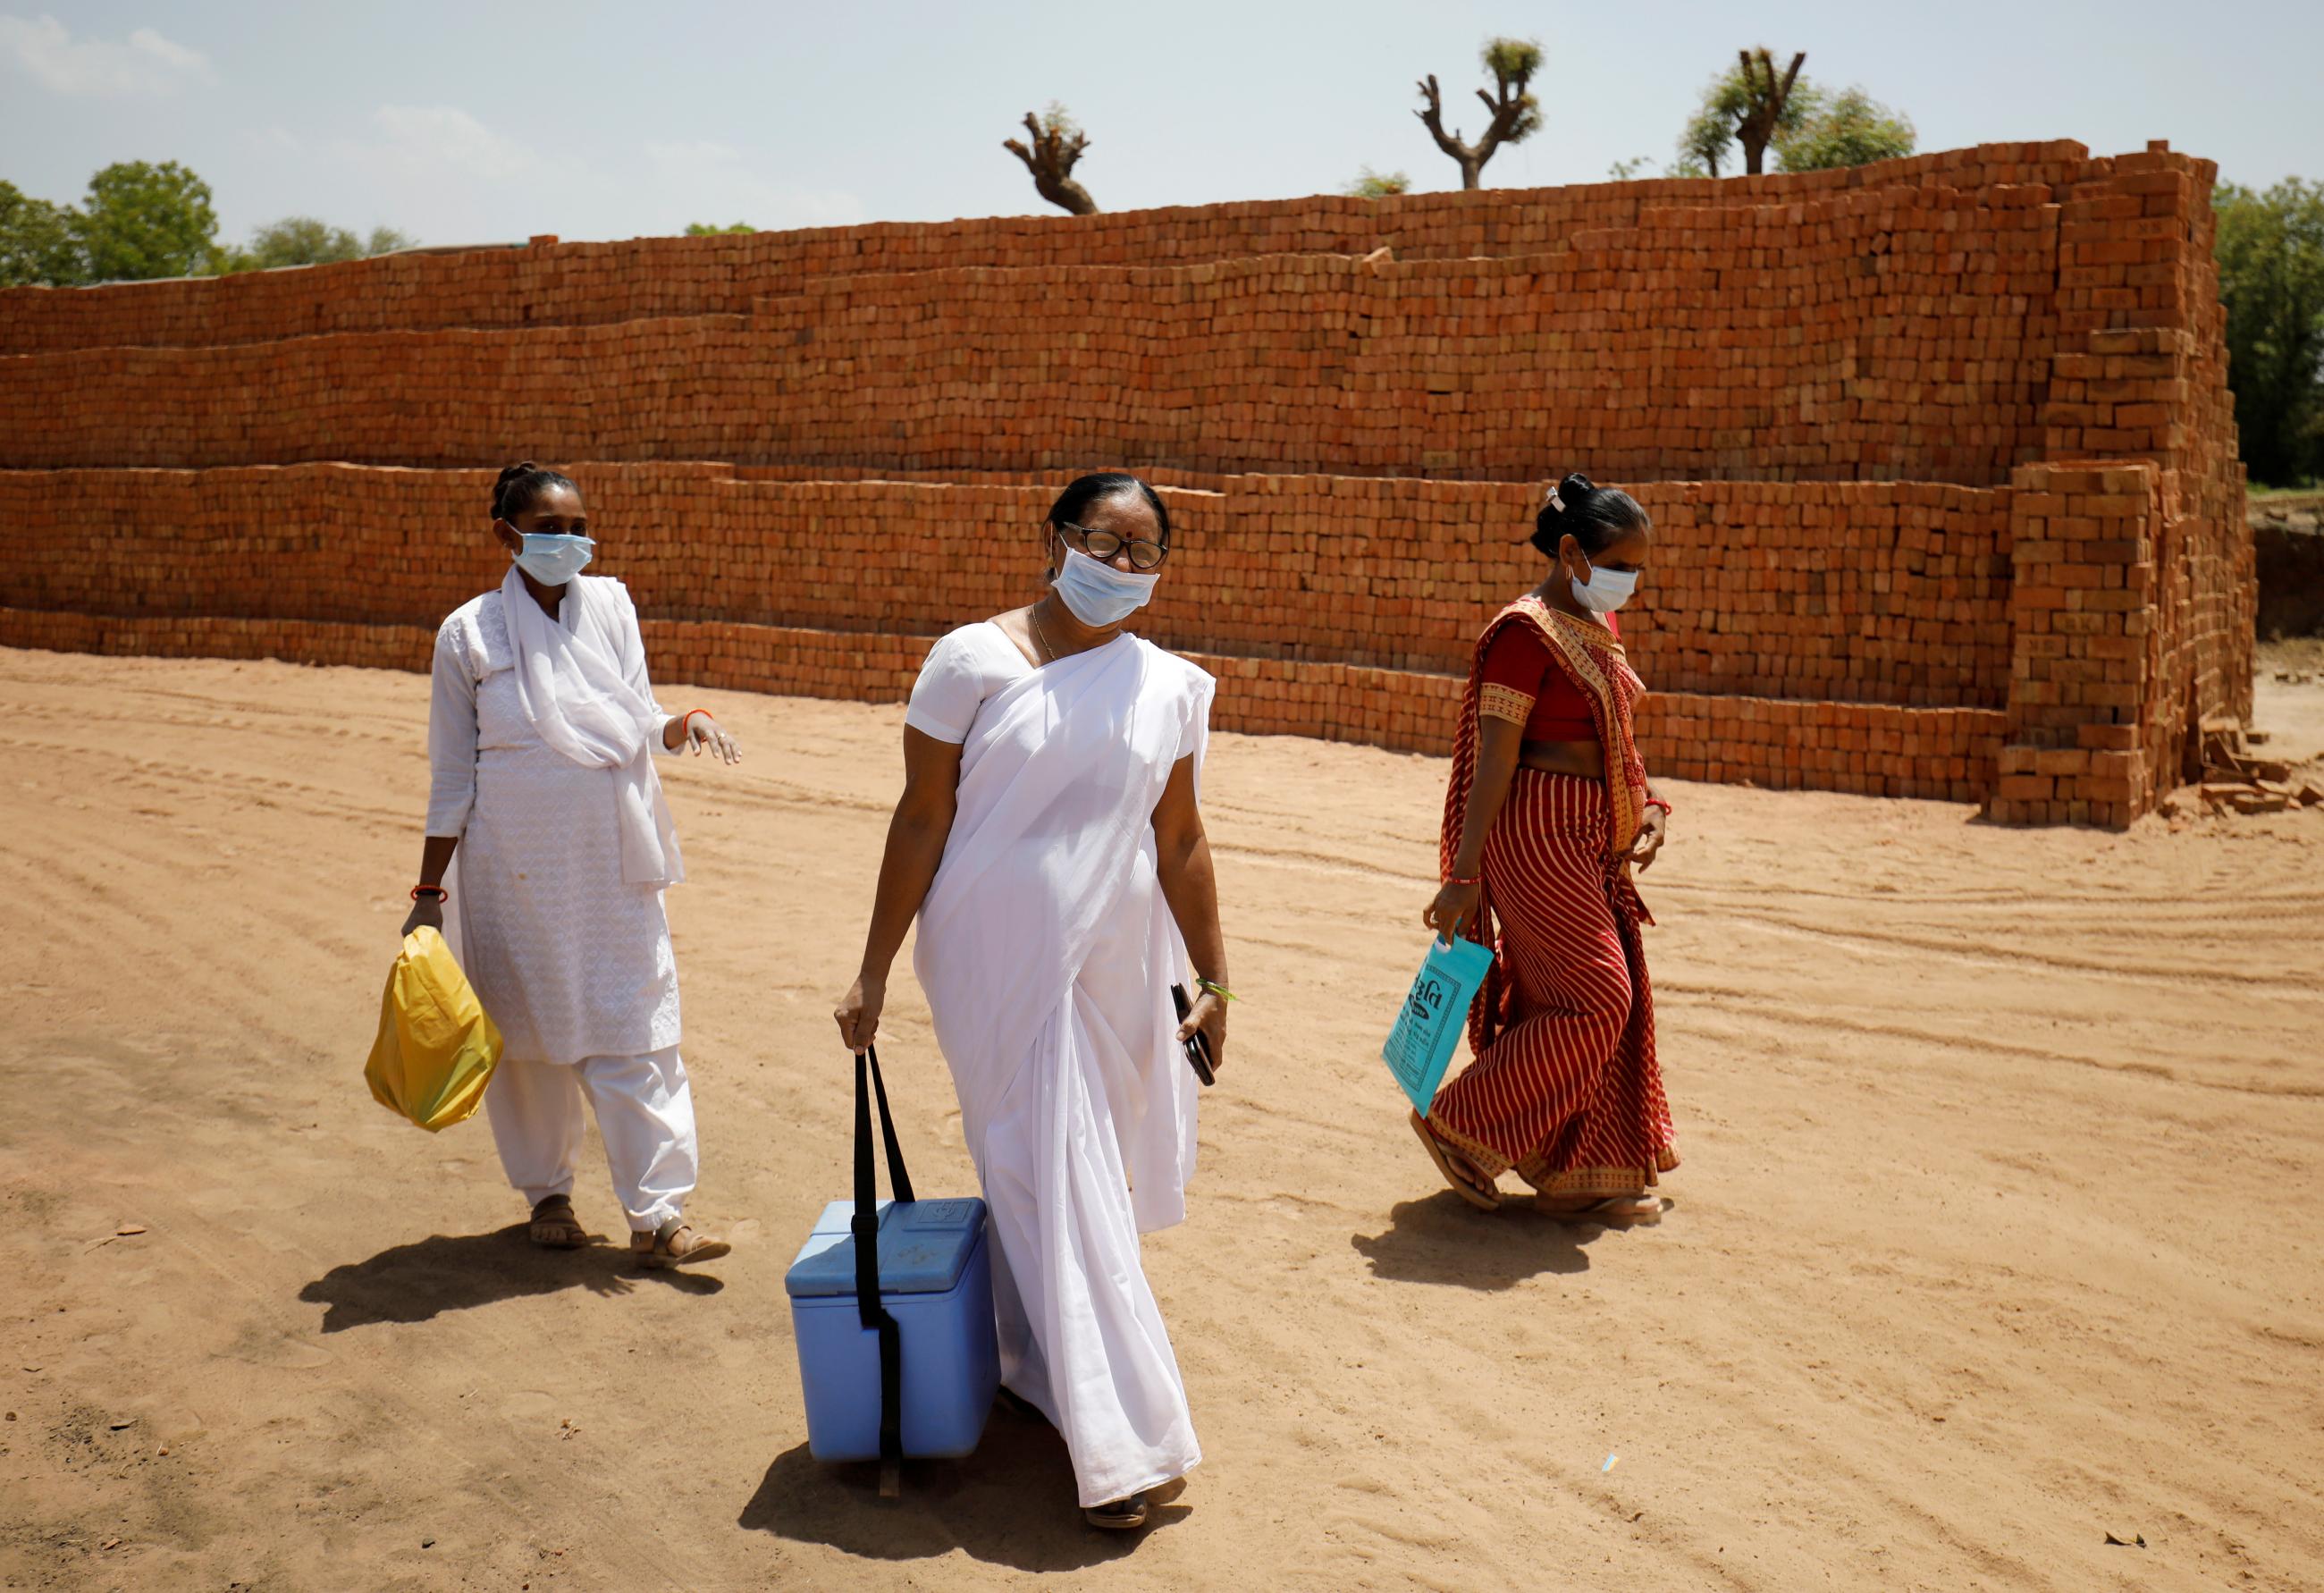 Health-care workers arrive with doses of COVISHIELD, a COVID vaccine manufactured by Serum Institute of India, at Kavitha village on the outskirts of Ahmedabad, India on April 8, 2021. REUTERS/Amit Dave